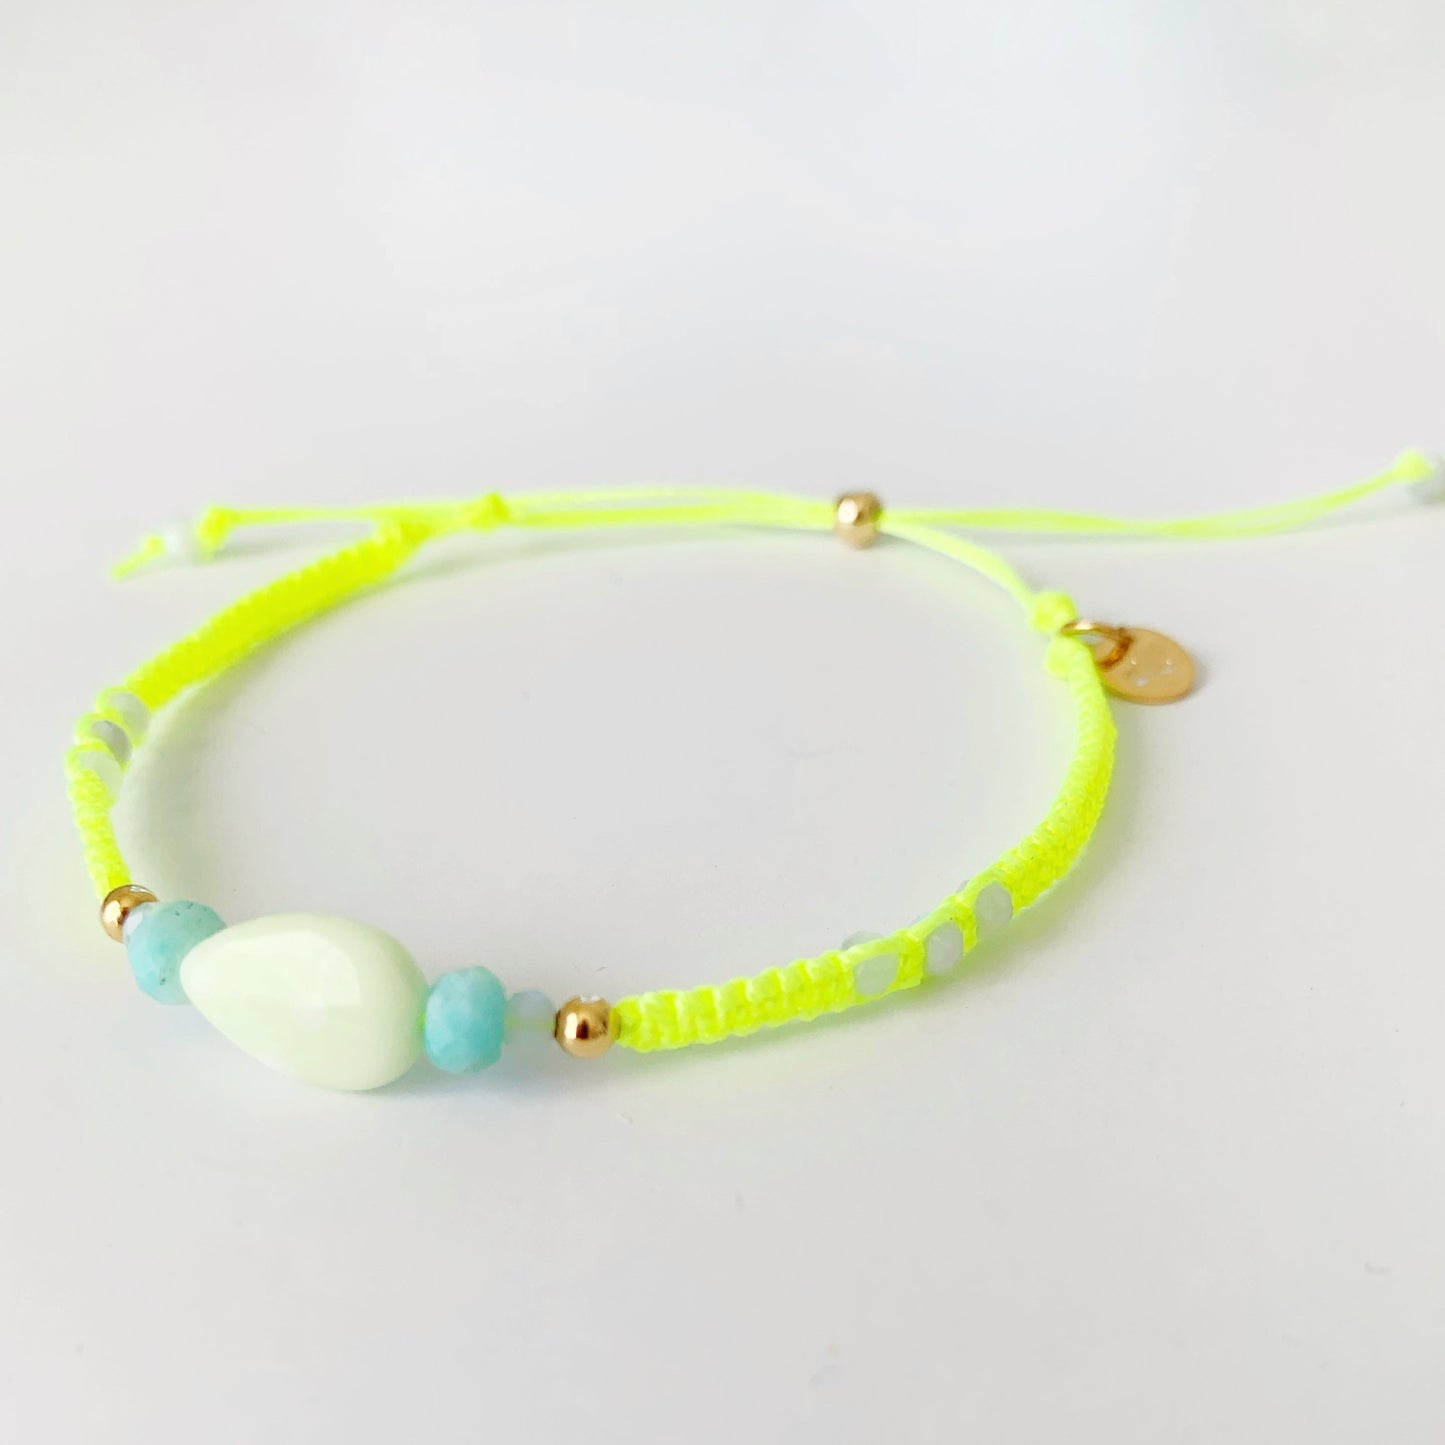 Captiva macrame bracelet by mermaids and madeleines in color sips on the court is a neon yellow bracelet with semiprecious beads at the center and a 14k gold filled slide bead clasp. this bracelet is photographed on a white surface